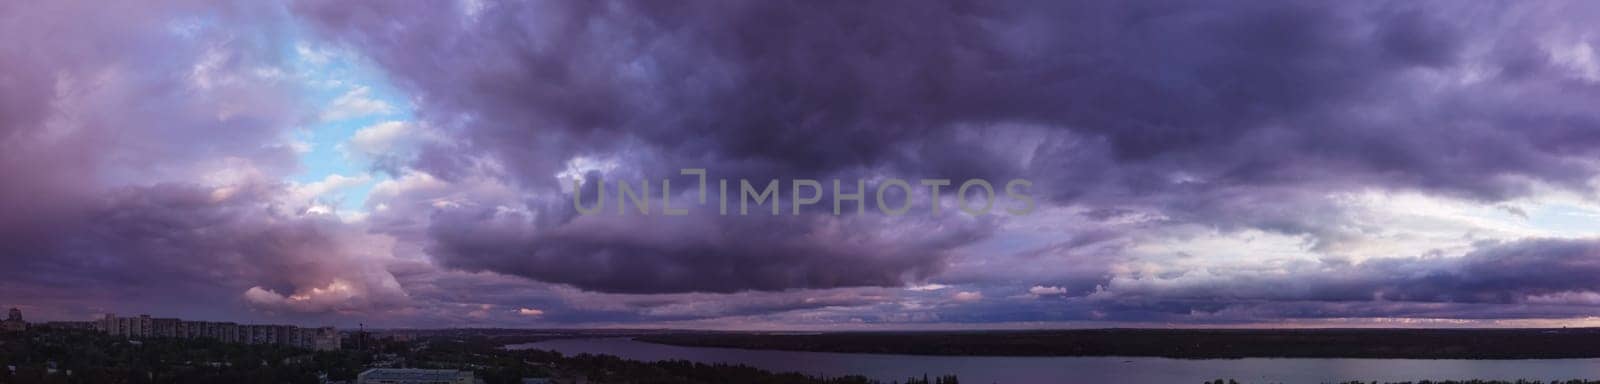 purple sunset with clouds over the city. sky panorama wallpaper design.dramatic by igor010